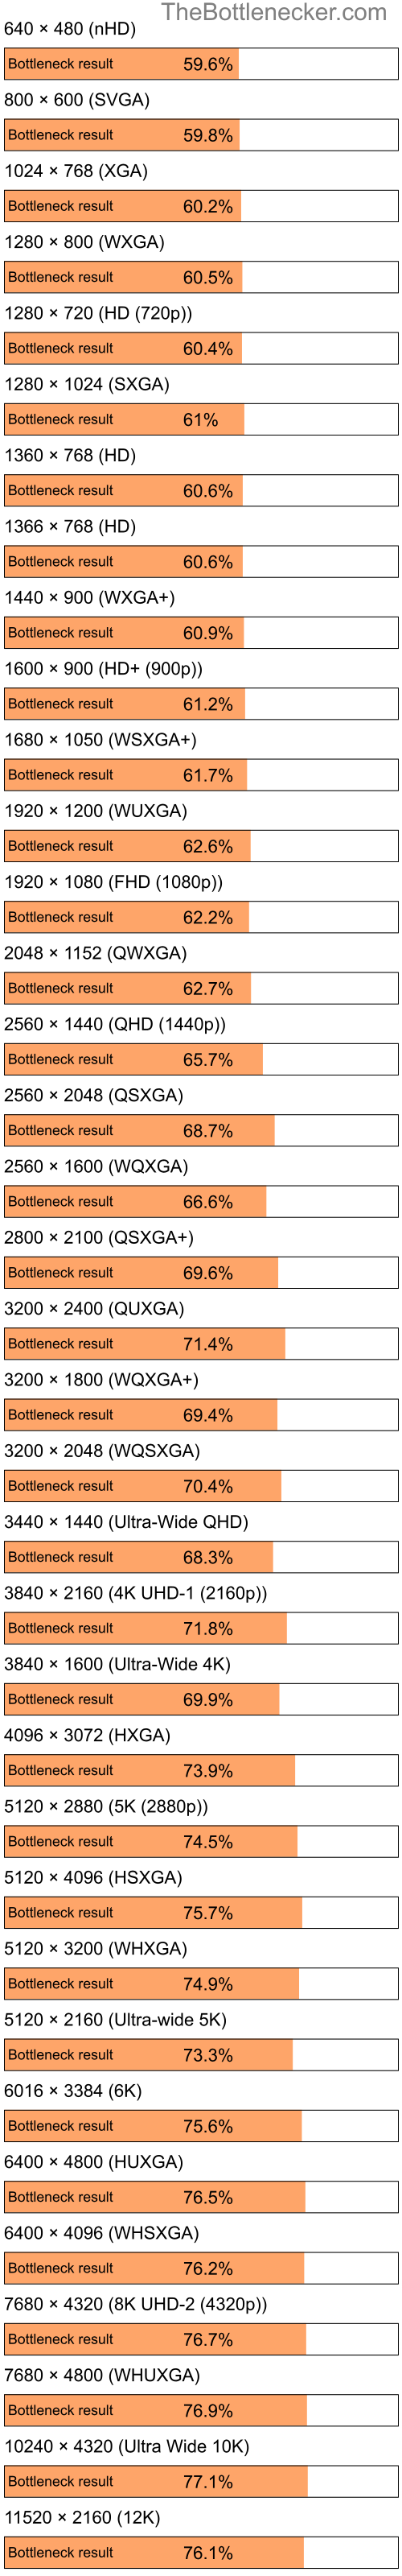 Bottleneck results by resolution for Intel Celeron and AMD M880G with Mobility Radeon HD 4200 in General Tasks